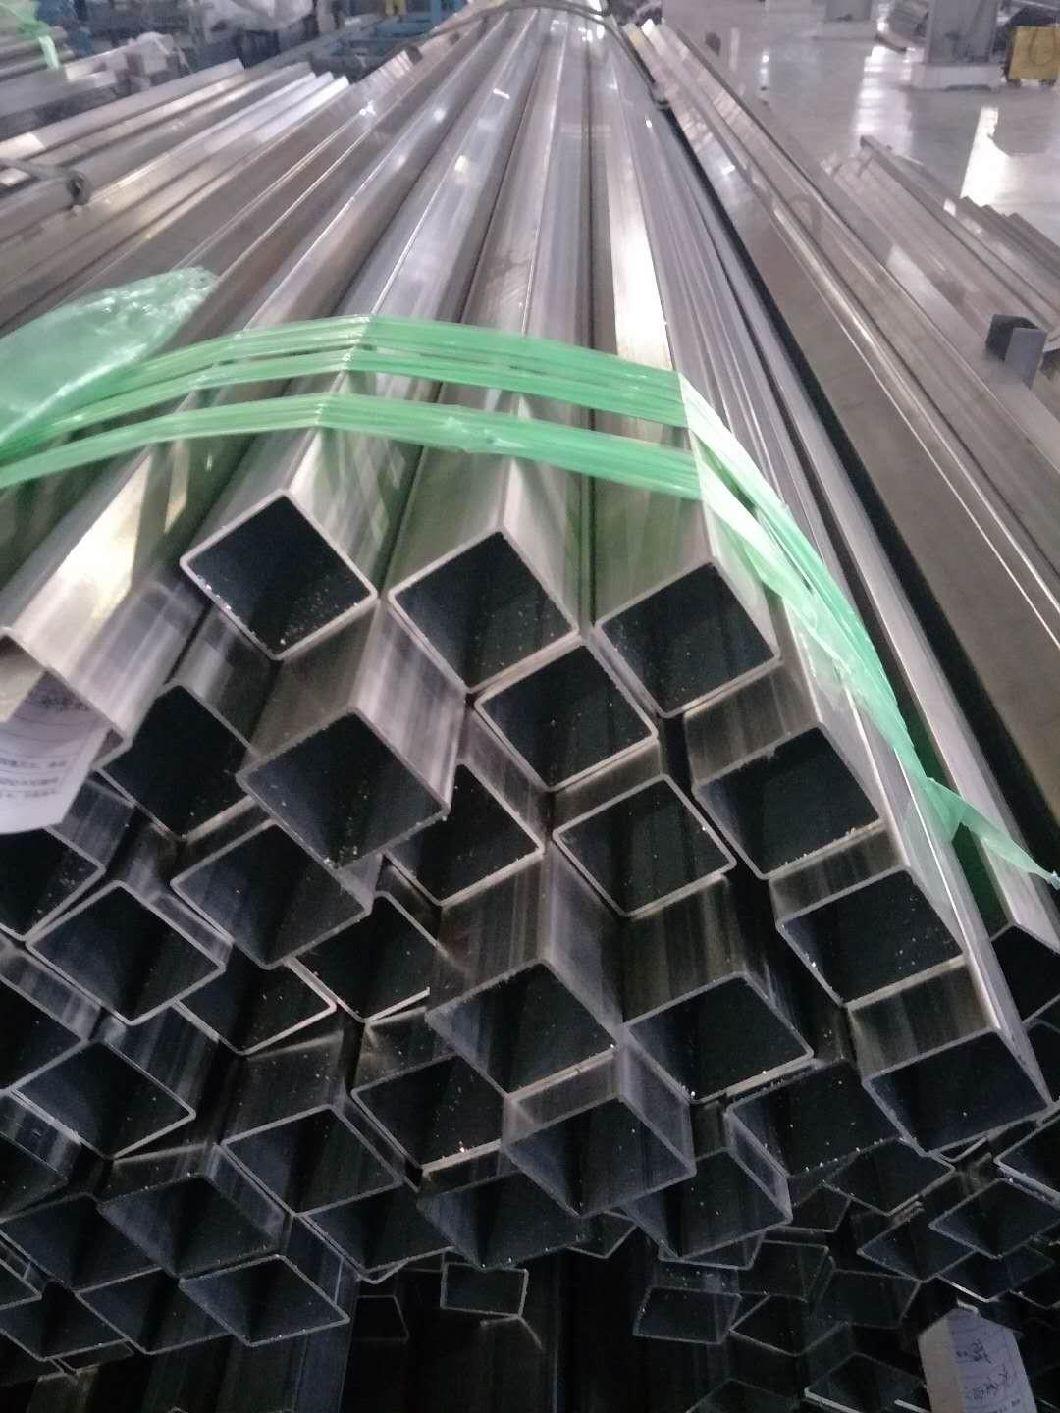 Stainless Steel Square Pipe Hairline Surface 304 316 Stainless Steel Square Tube for Decorative Application Price